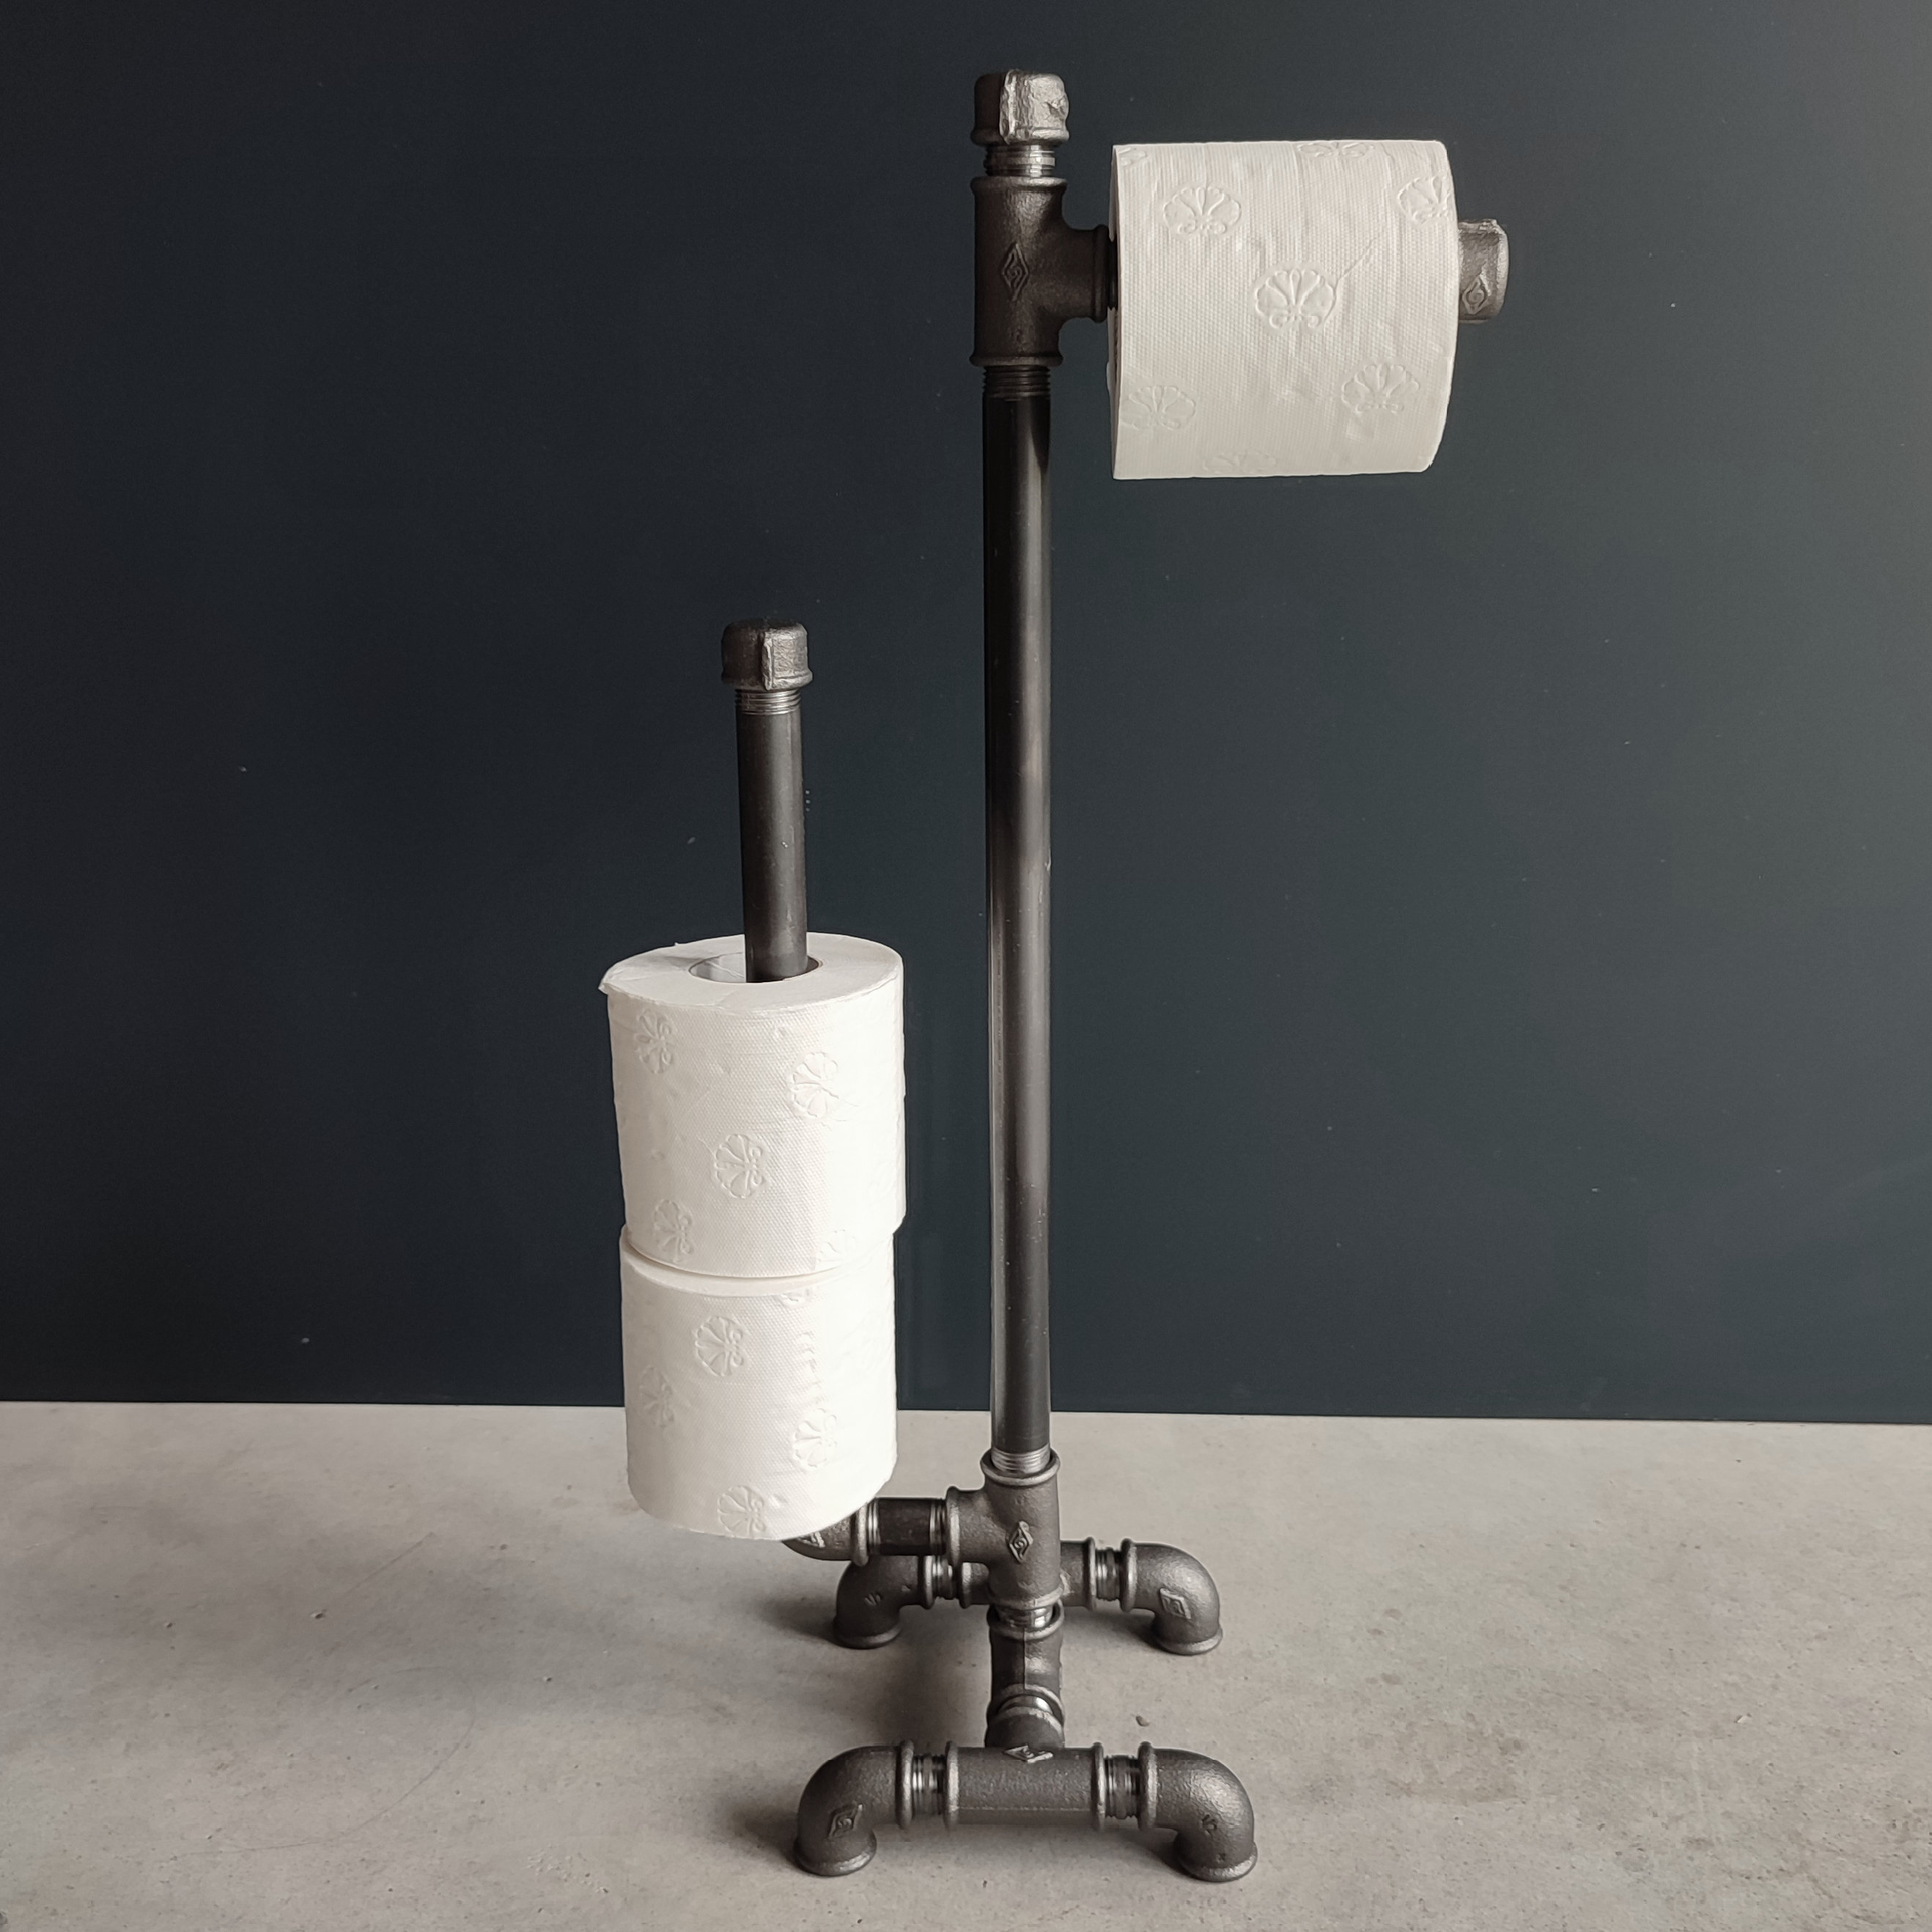 5 models of toilet paper holder to make industrial toilet decoration - MC  Fact